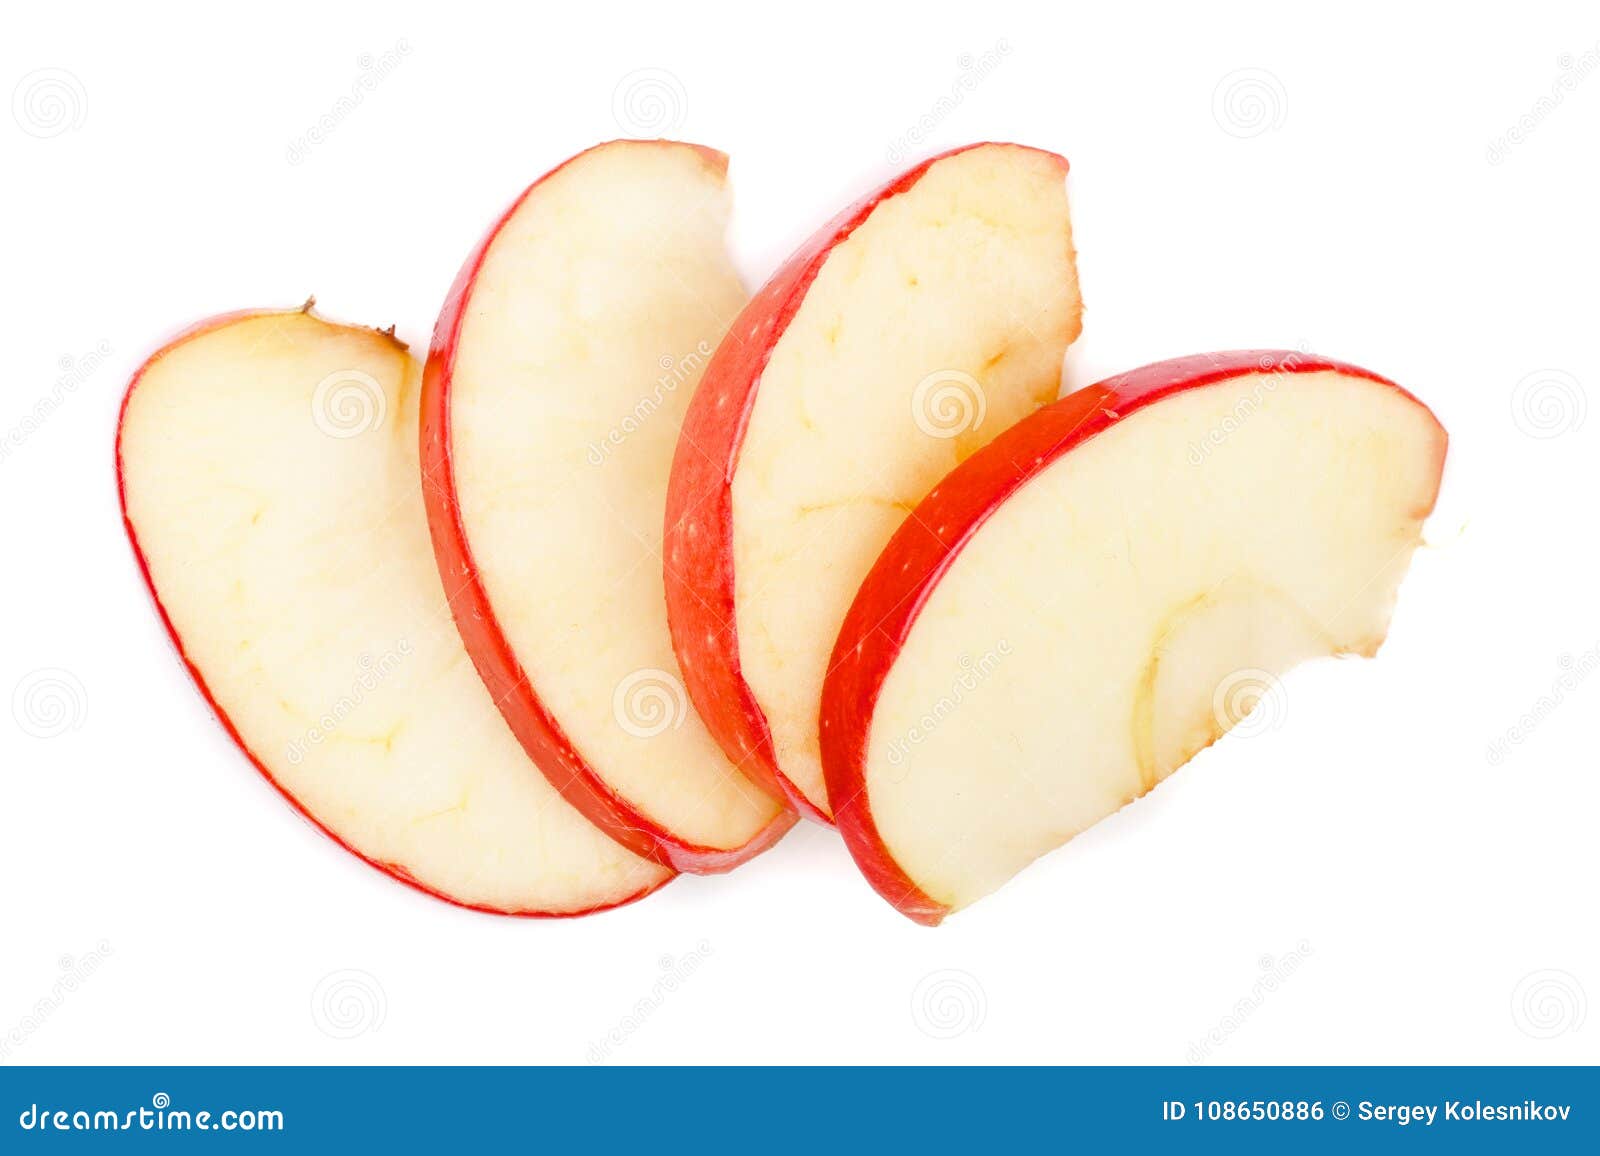 Three Red Apples On A Food Scale On A White Background Stock Photo, Picture  and Royalty Free Image. Image 6768478.